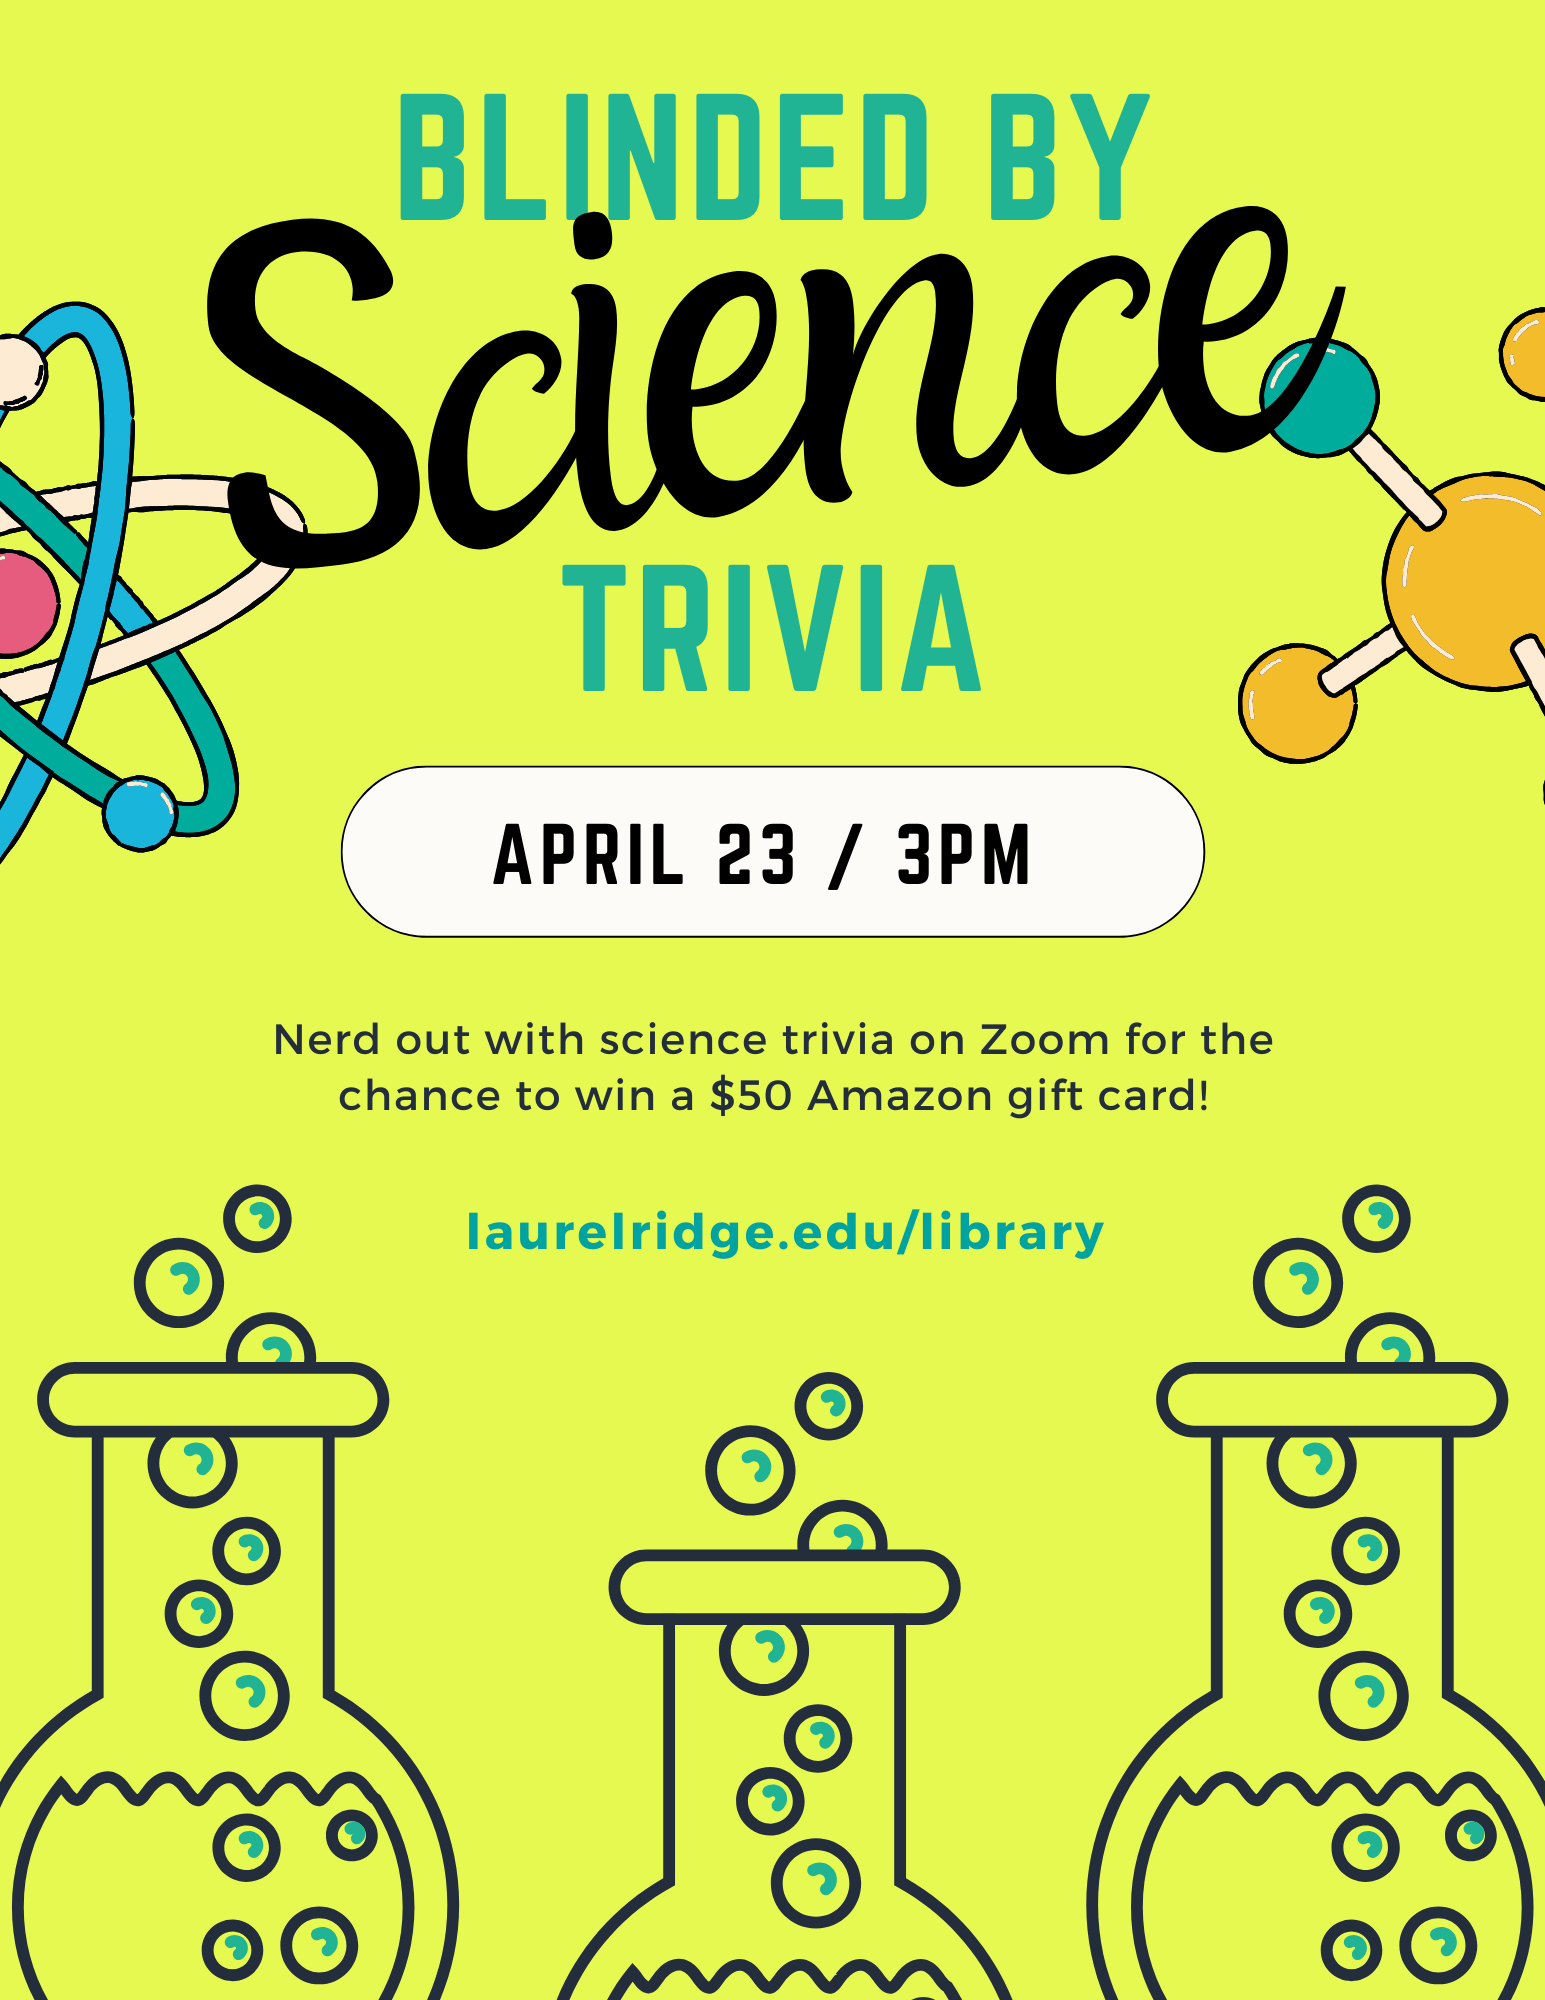 Blinded by Science Trivia flyer